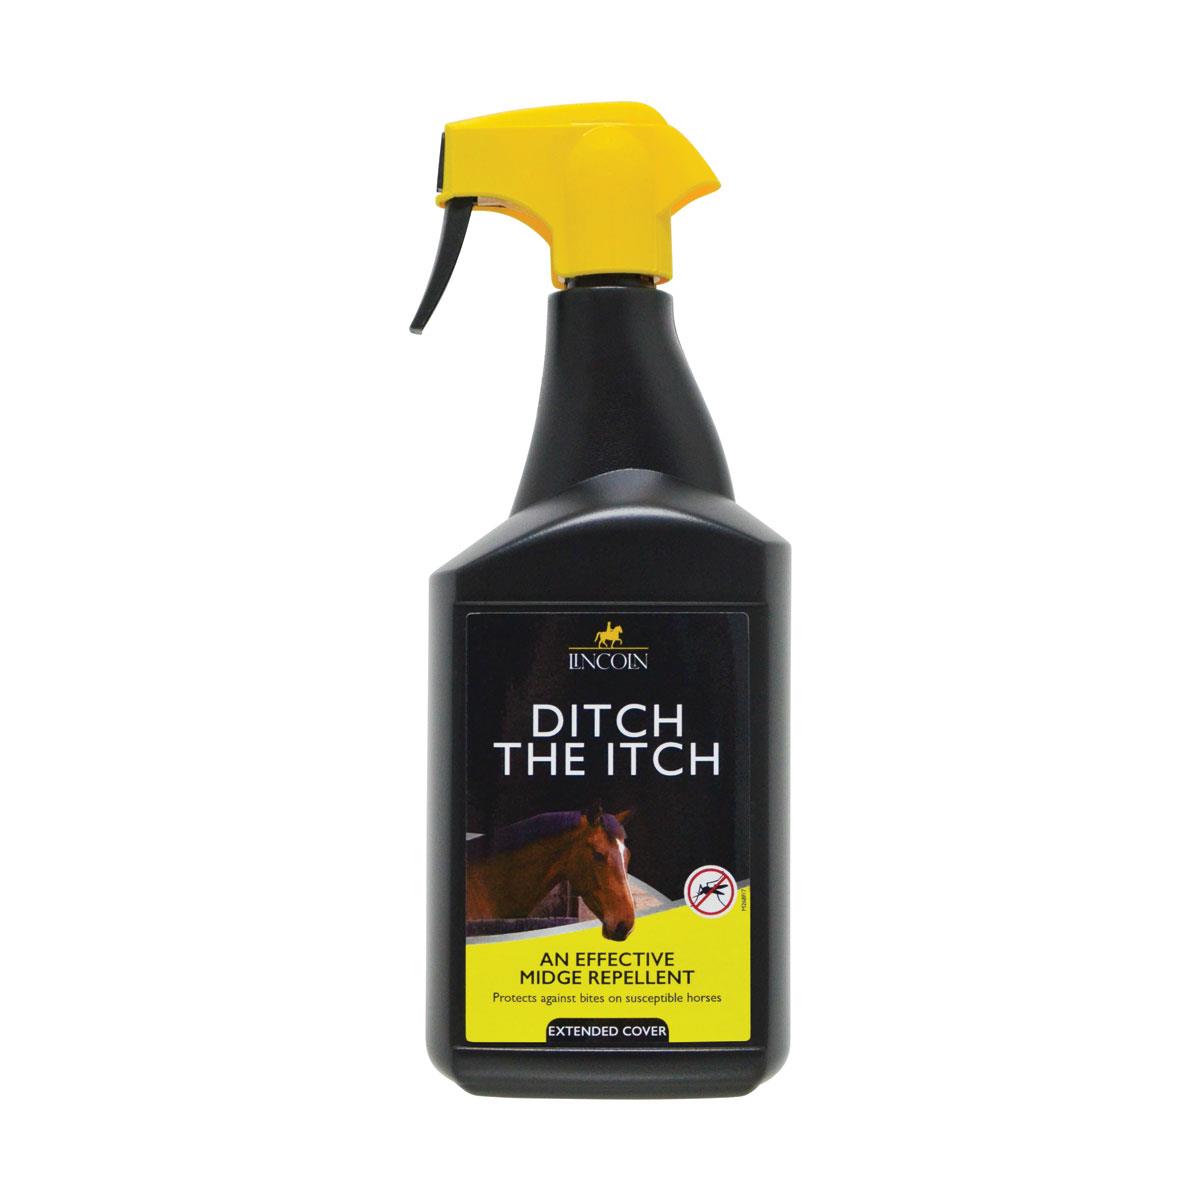 LINCOLN DITCH THE ITCH: Highly Effective Midge Repellent